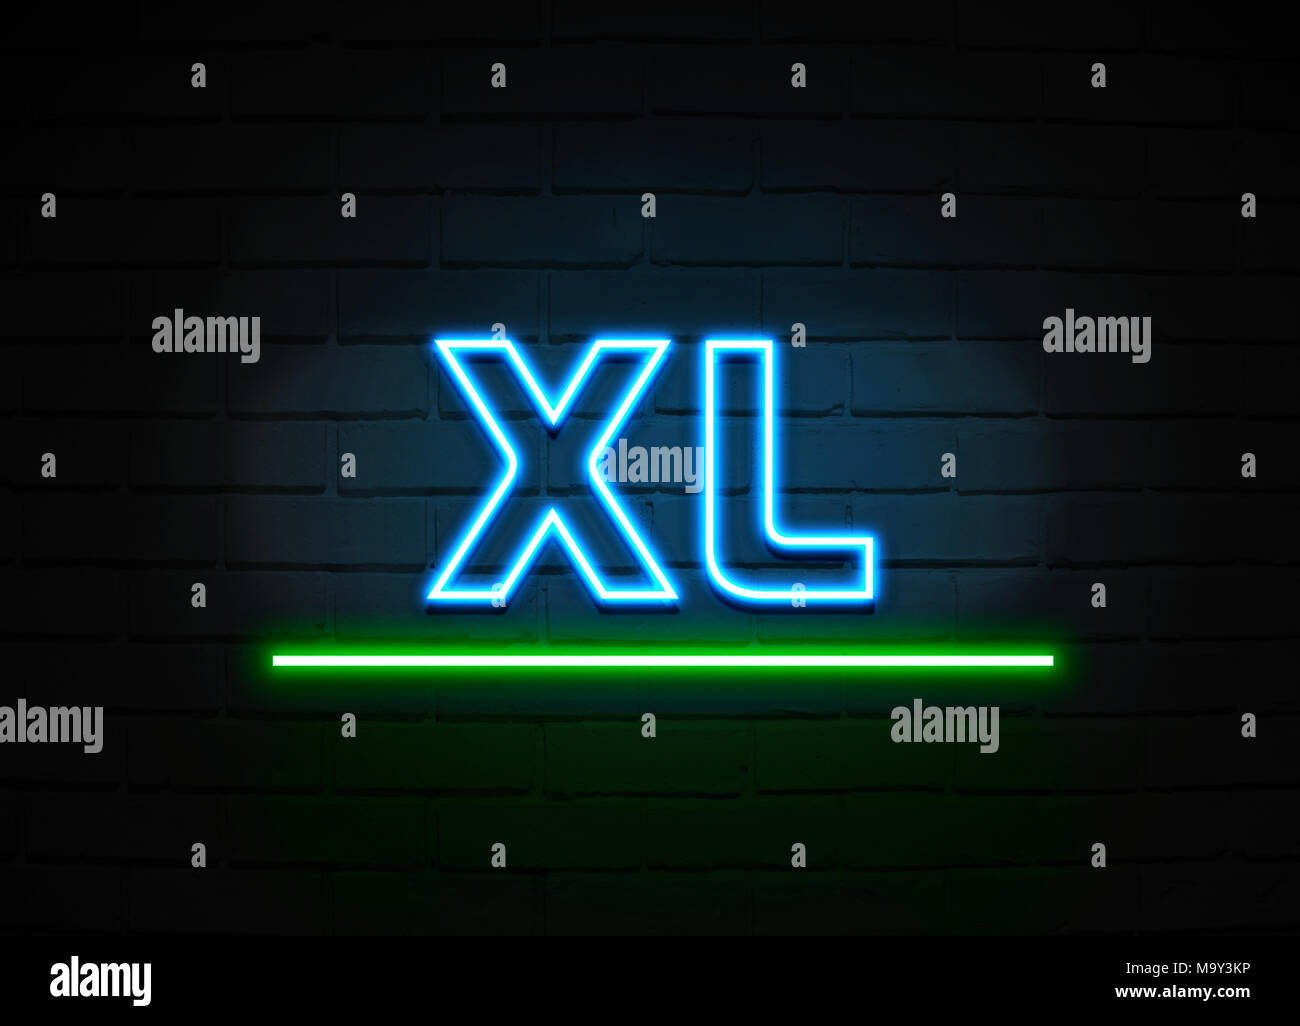 Xl technology sign Cut Out Stock Images & Pictures - Alamy